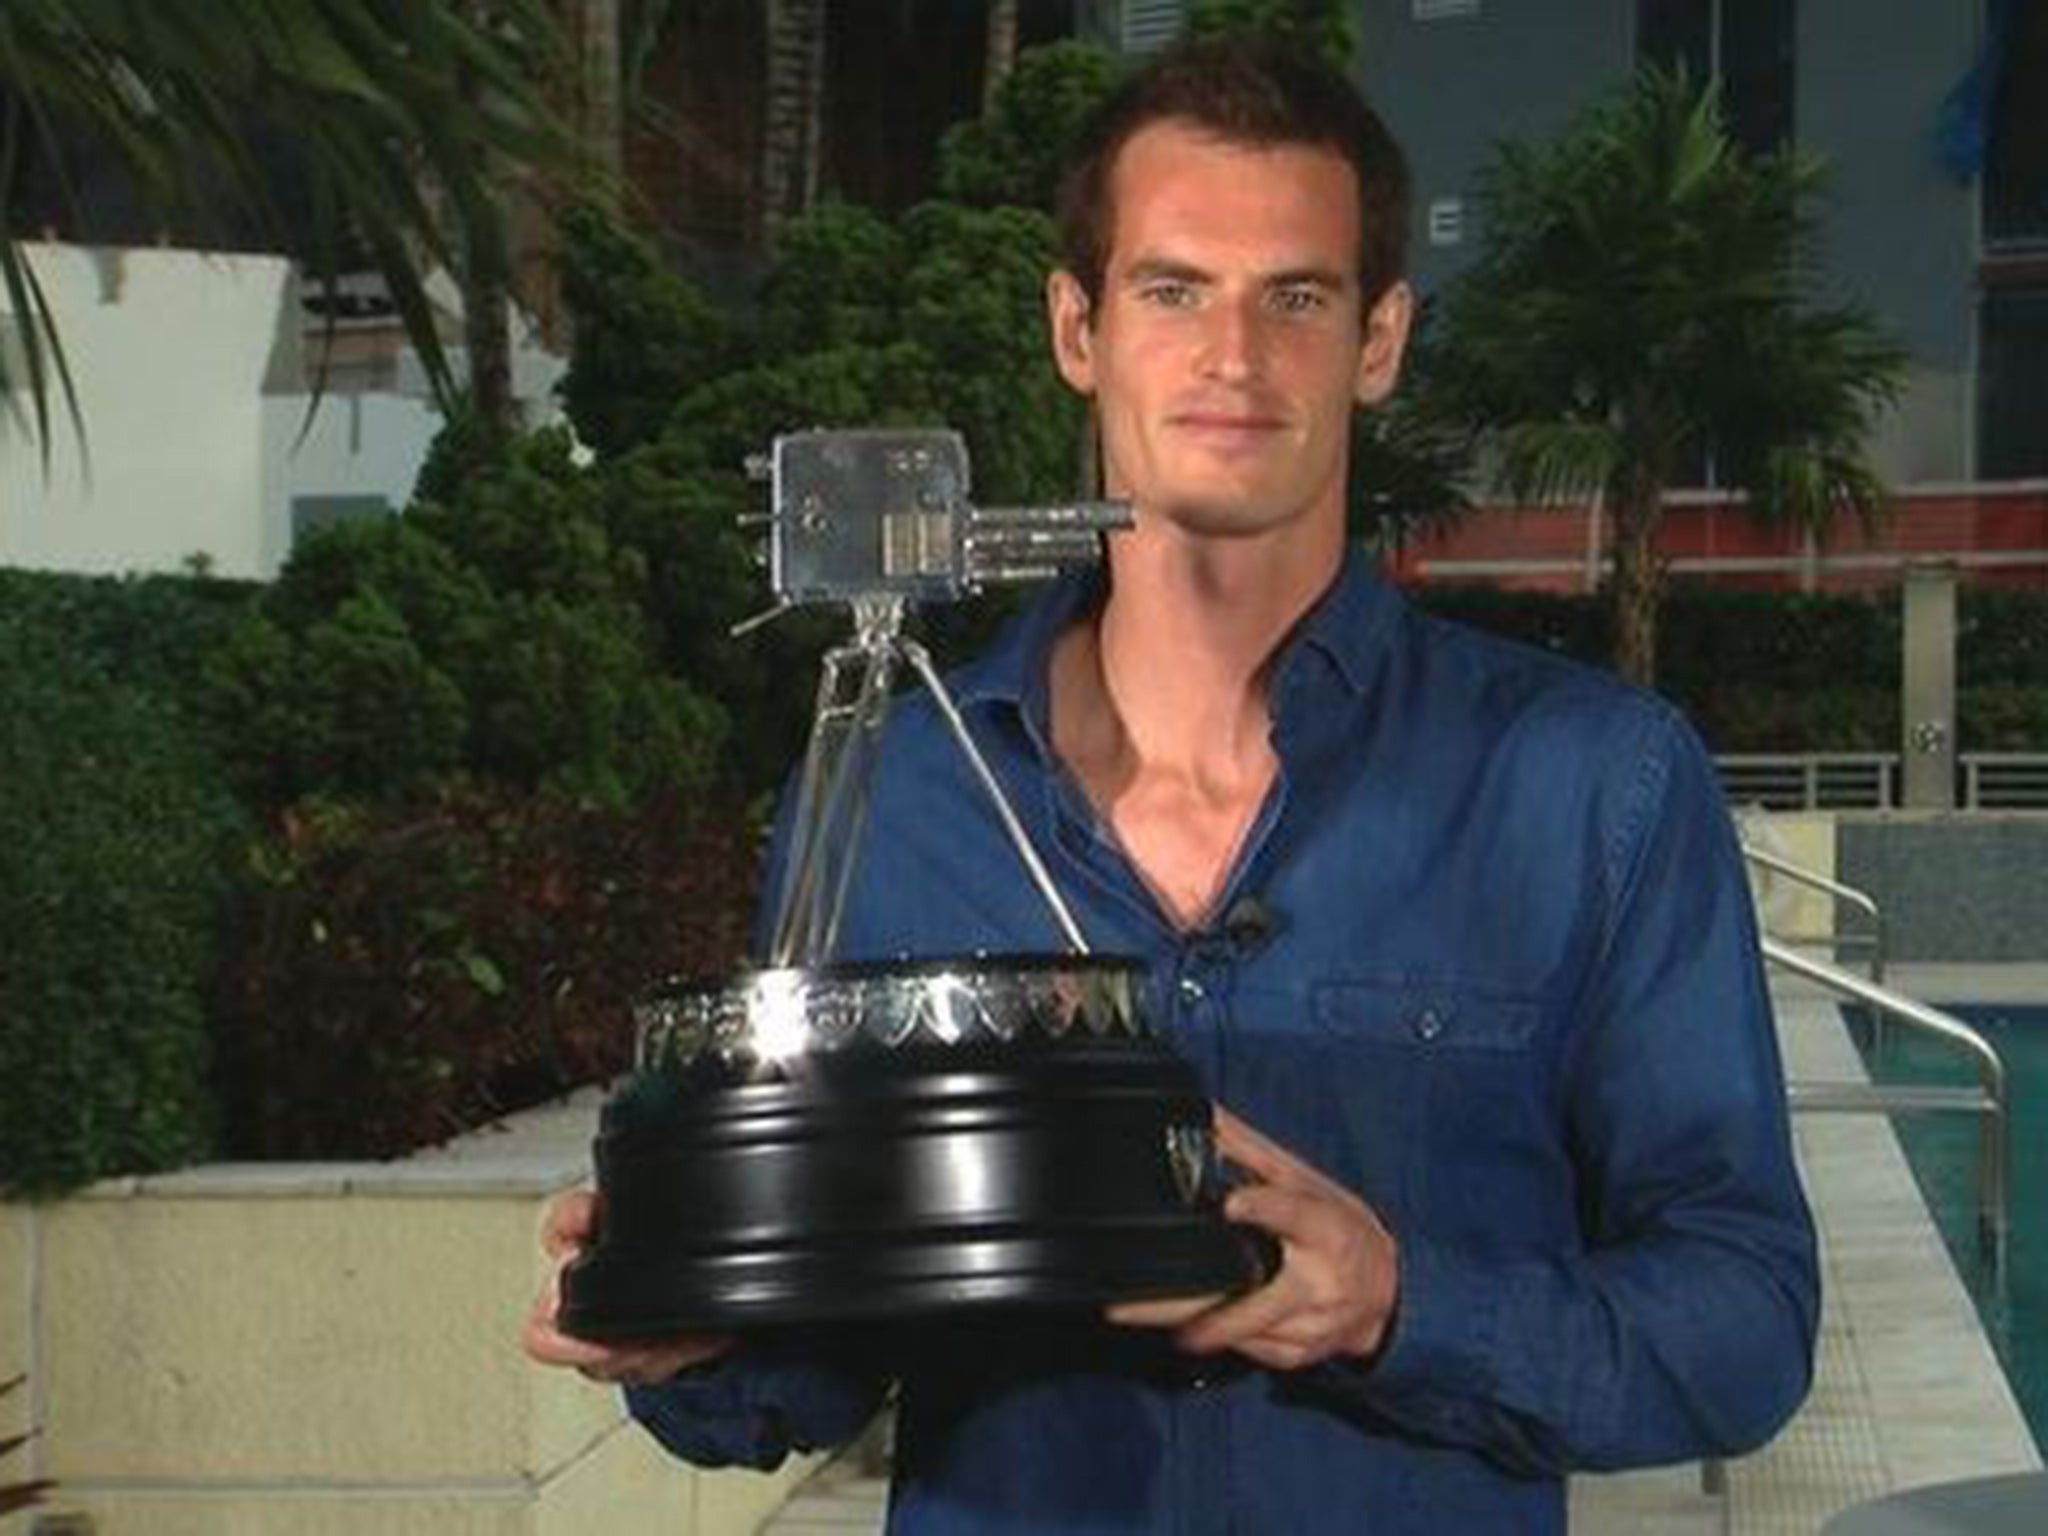 Andy Murray won the BBC Sports Personality of the Year award in 2013